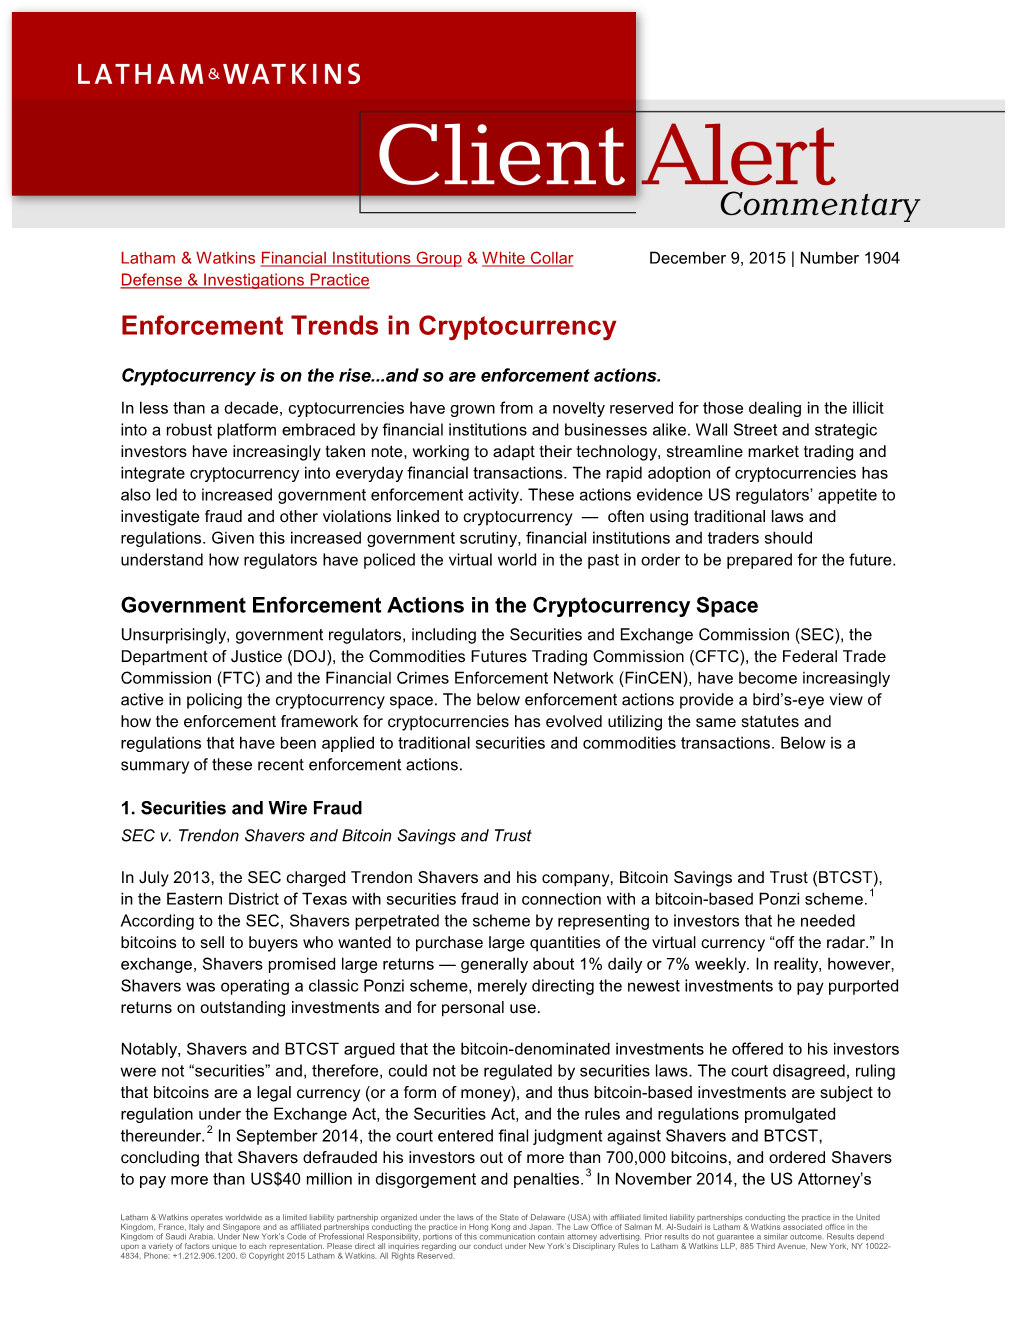 Enforcement Trends in Cryptocurrency